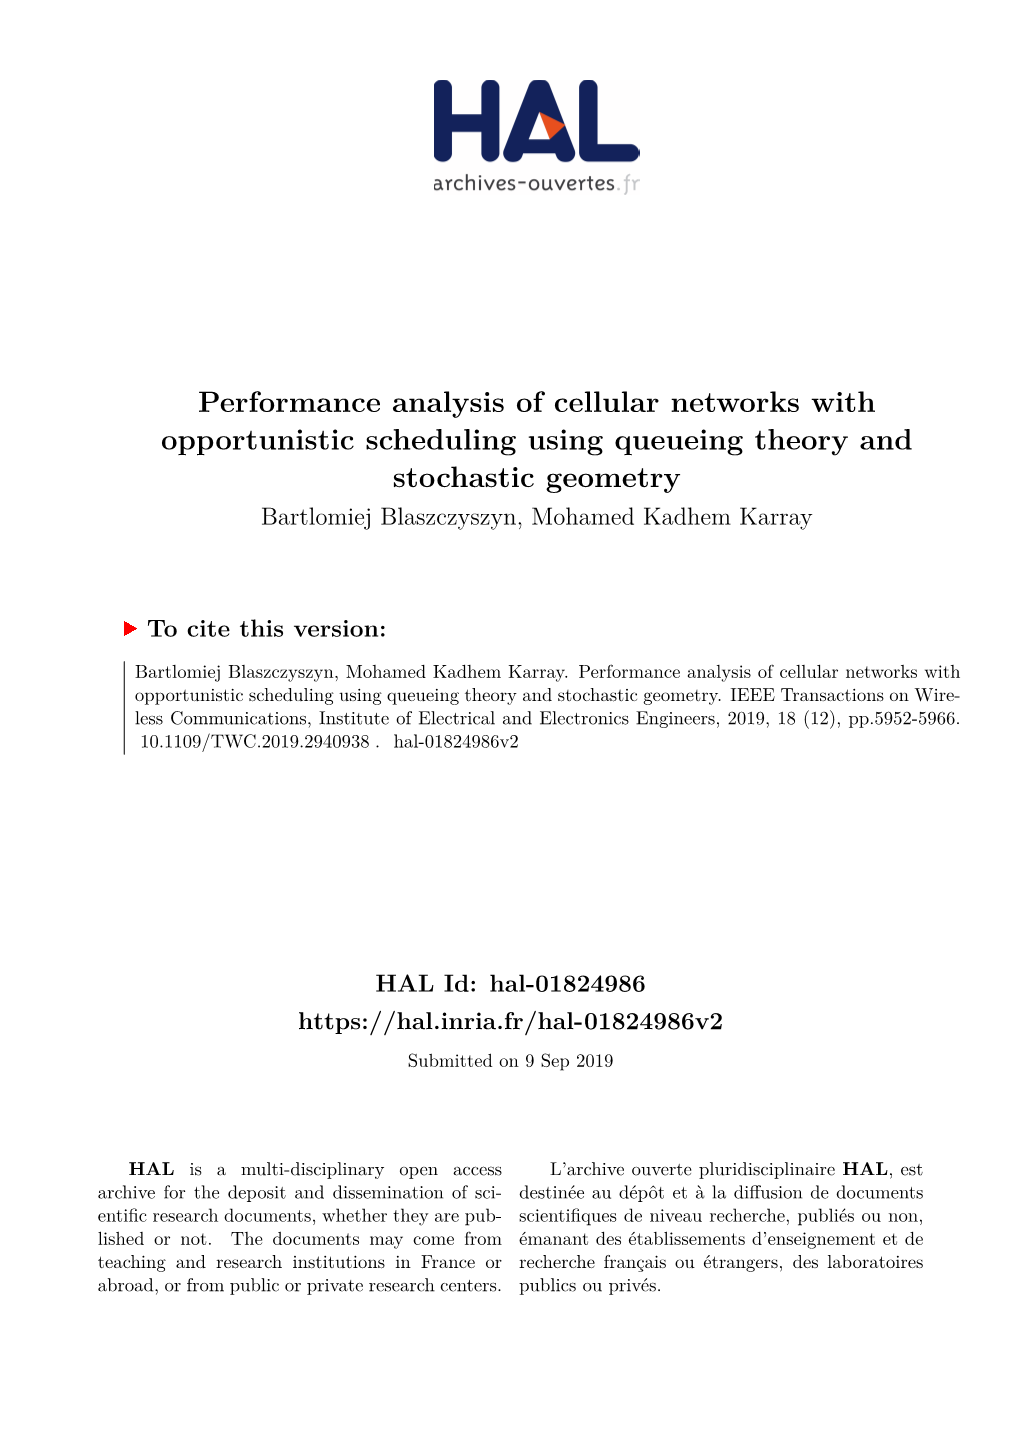 Performance Analysis of Cellular Networks with Opportunistic Scheduling Using Queueing Theory and Stochastic Geometry Bartlomiej Blaszczyszyn, Mohamed Kadhem Karray